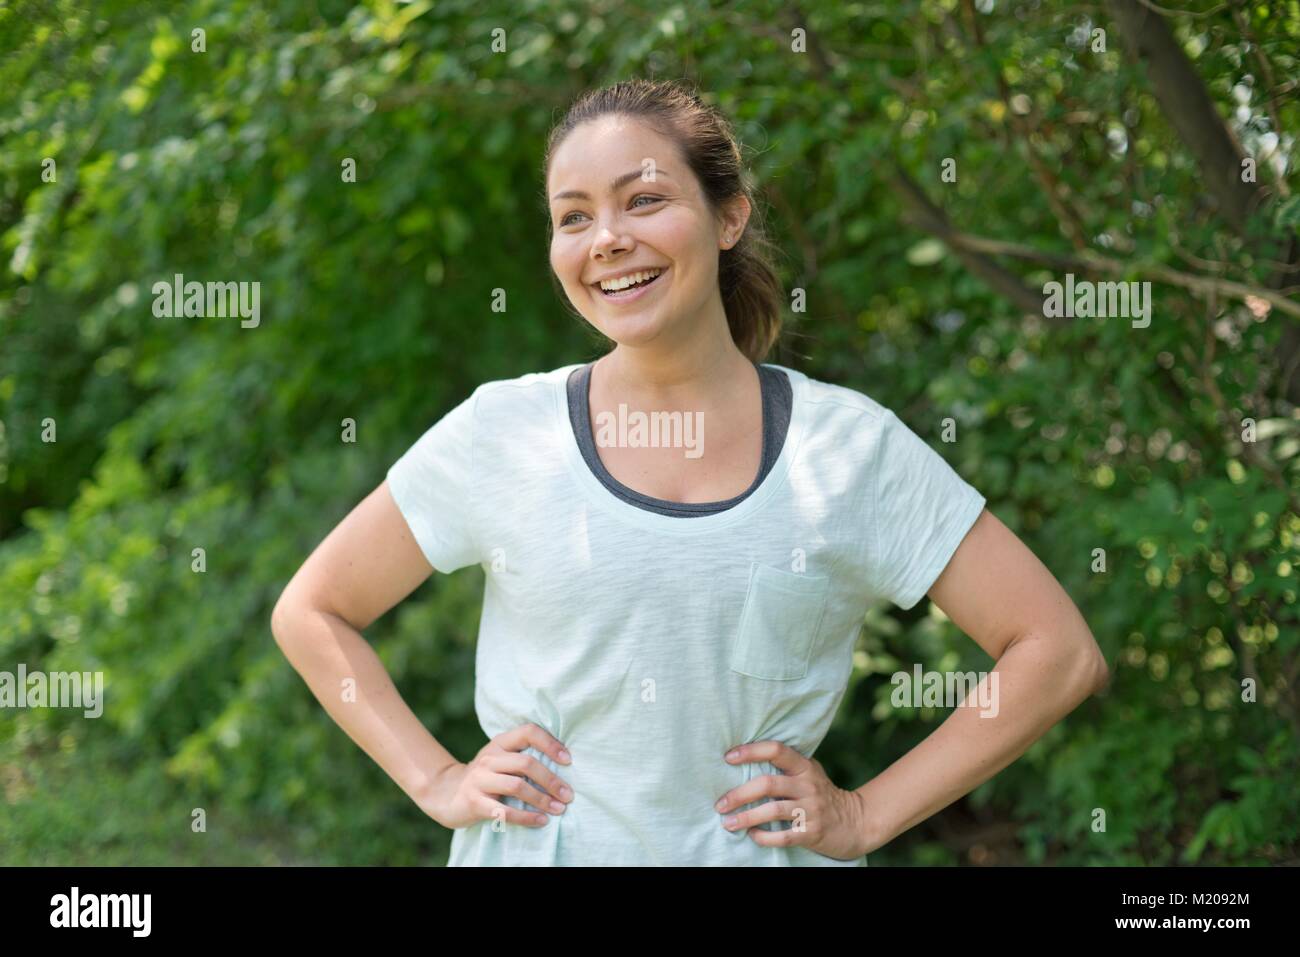 Young woman with hands on hips, smiling. Stock Photo